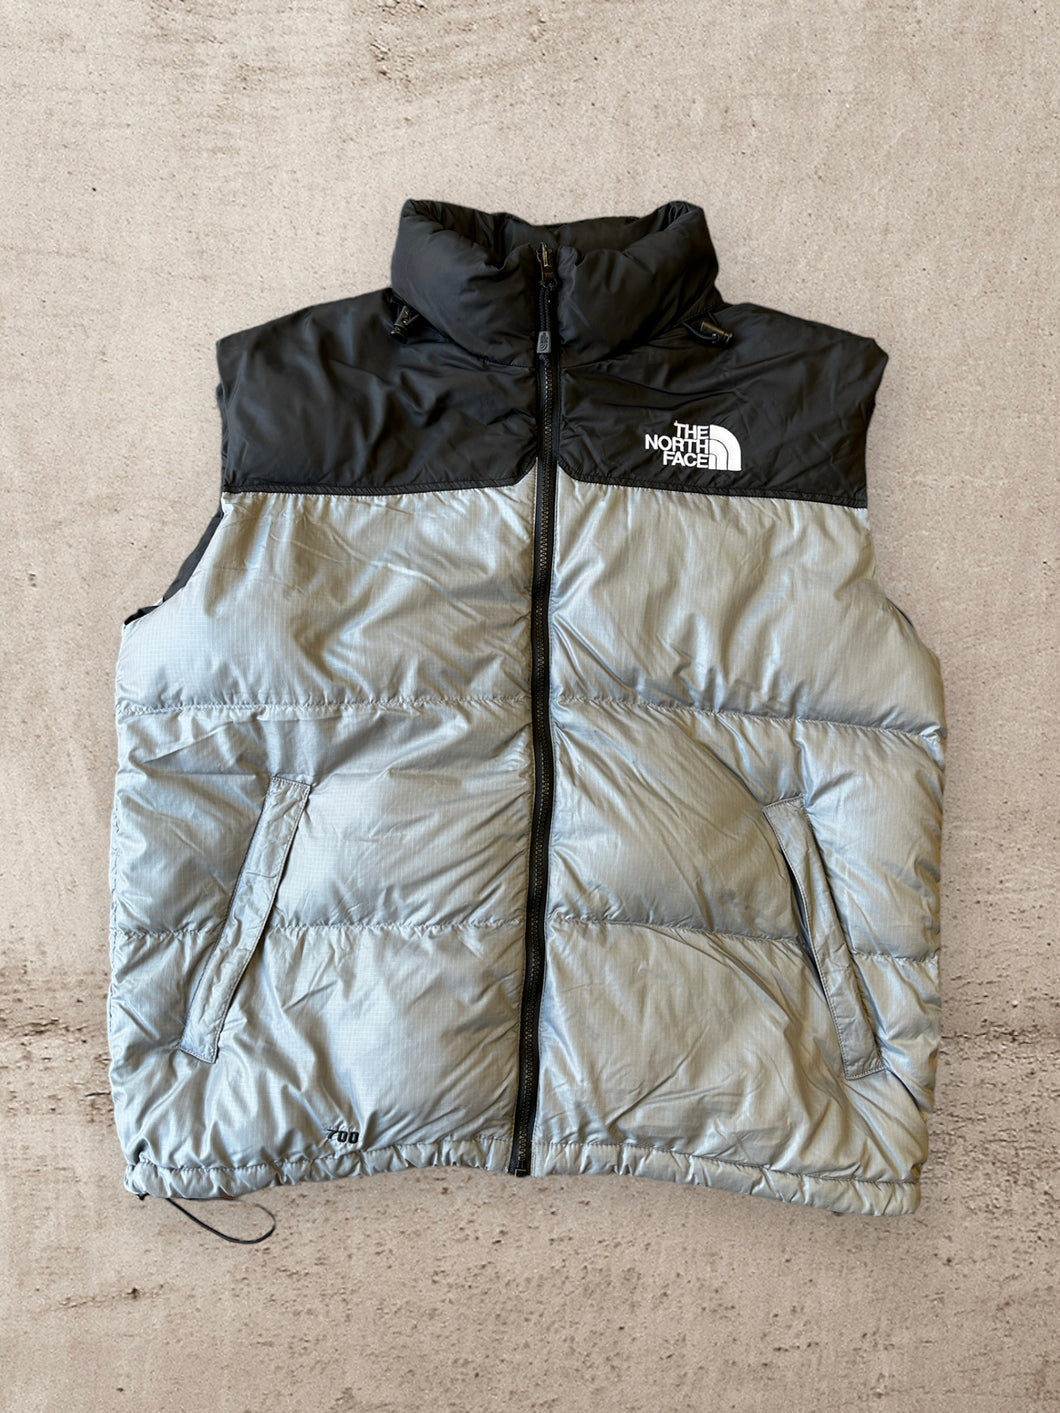 The North Face 700 Puffer Vest Silver/Grey - XL